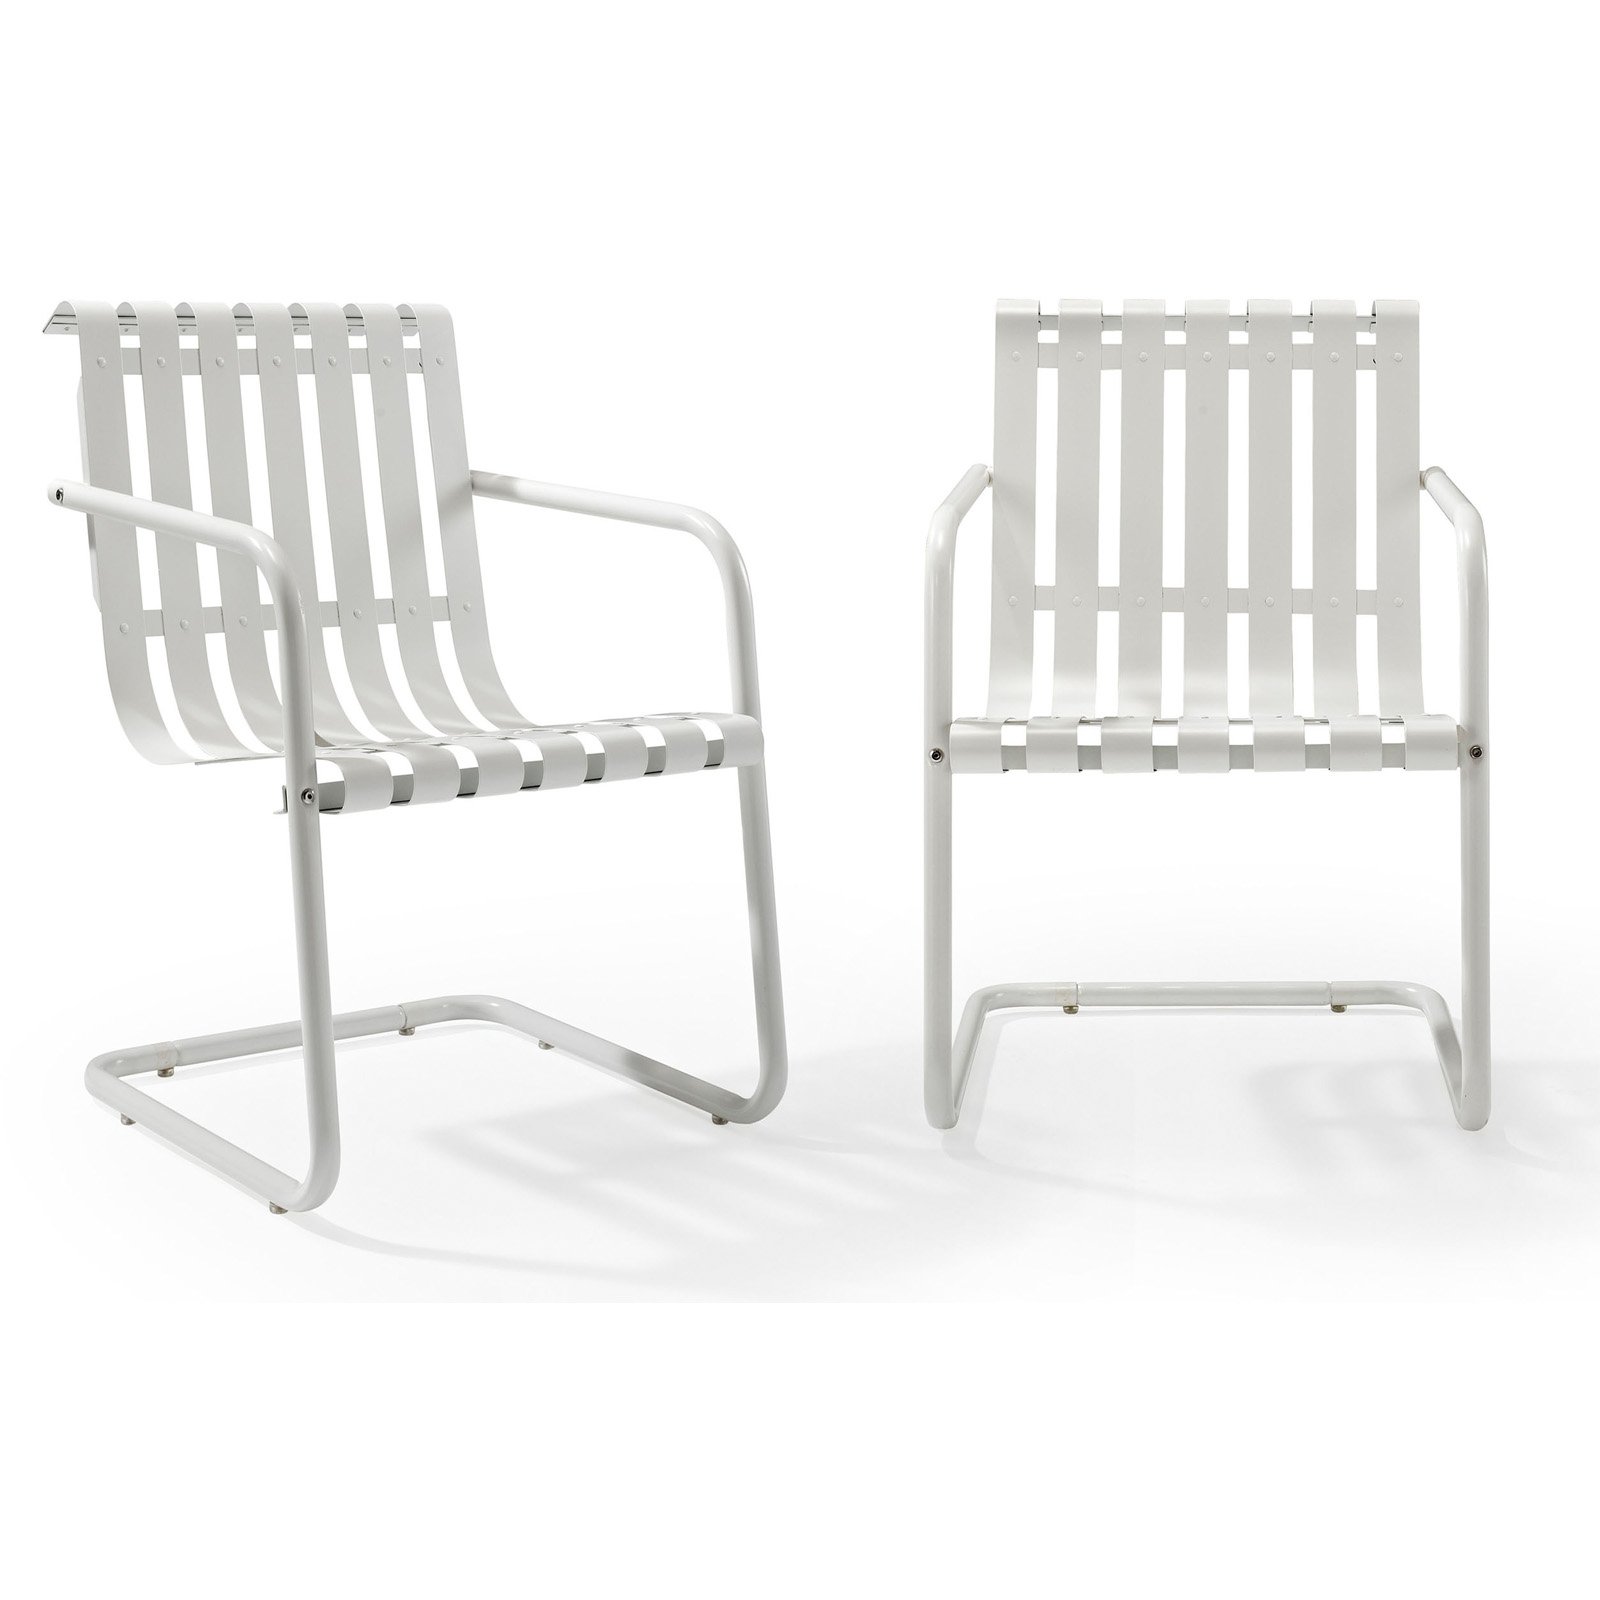 Crosley Gracie Metal Patio Chair in White (Set of 2) - image 1 of 3